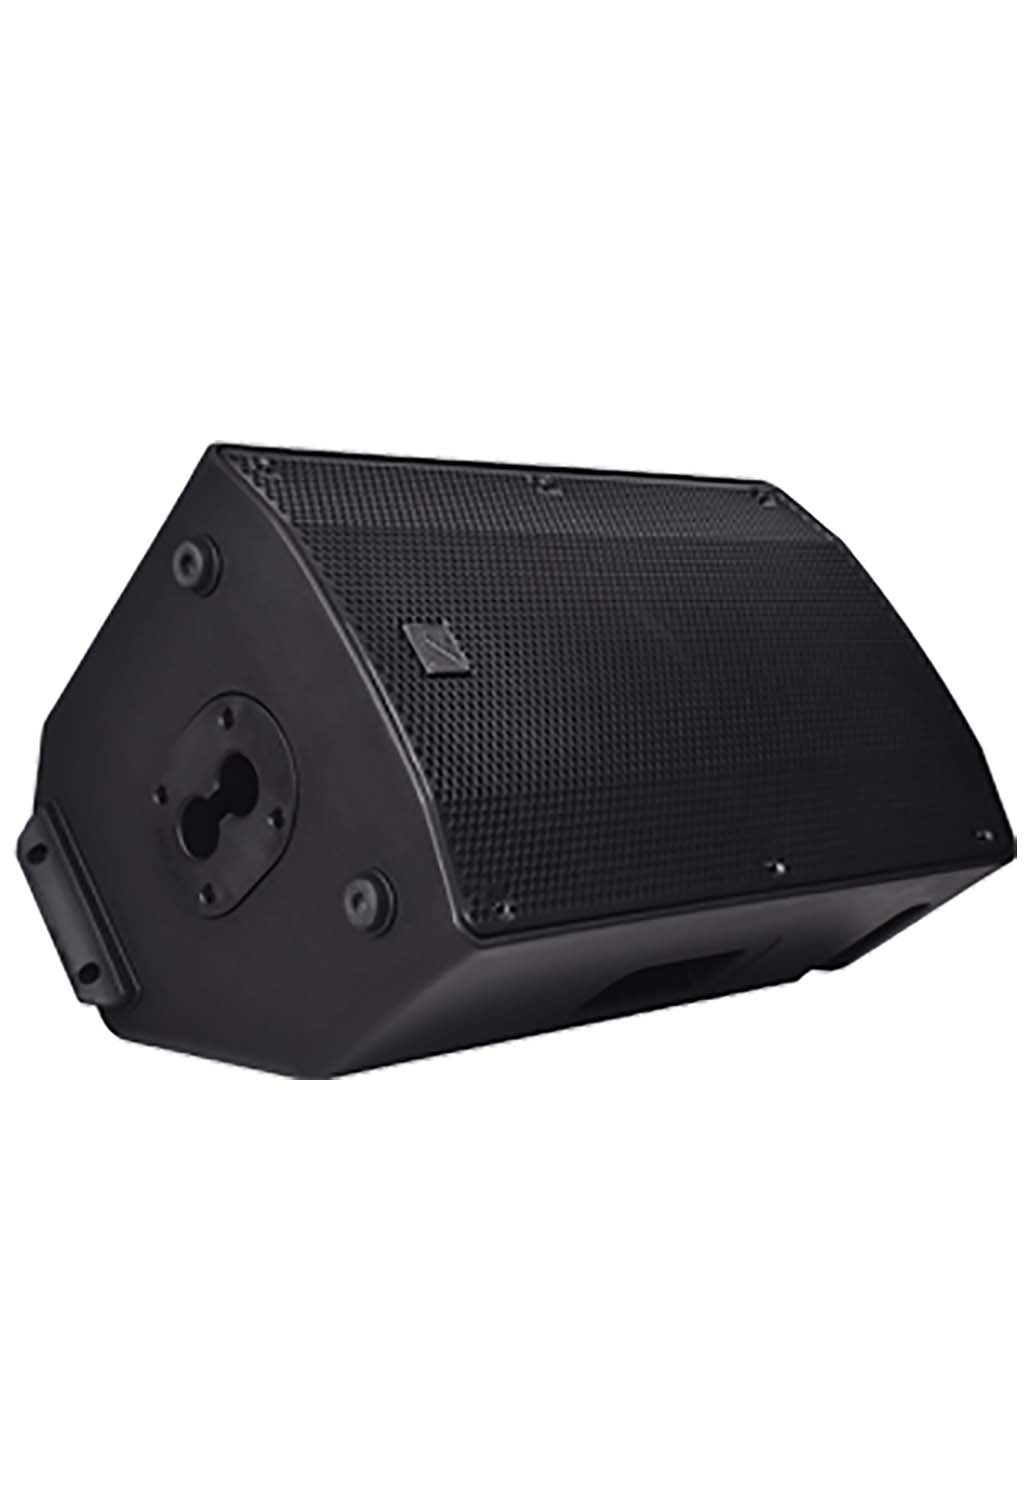 Yorkville YXL12P 12-inch Powered PA Speaker with Bluetooth - Hollywood DJ